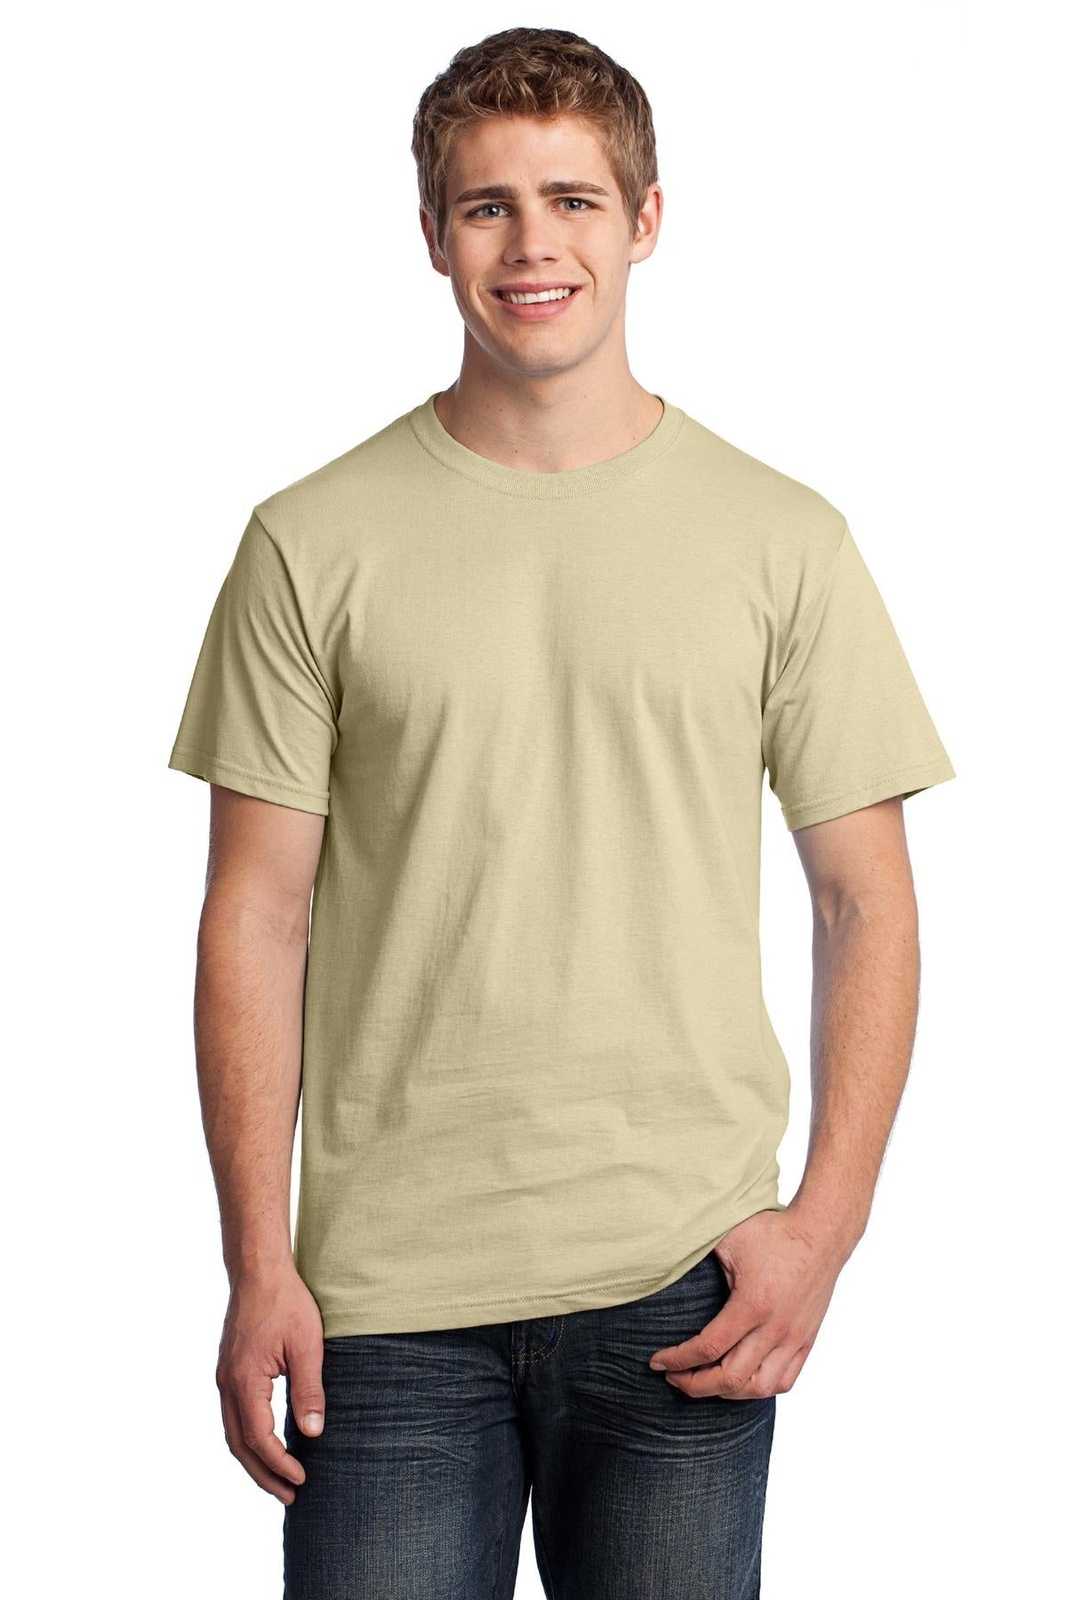 Fruit of the Loom 3930 HD Cotton 100% Cotton T-Shirt - Natural